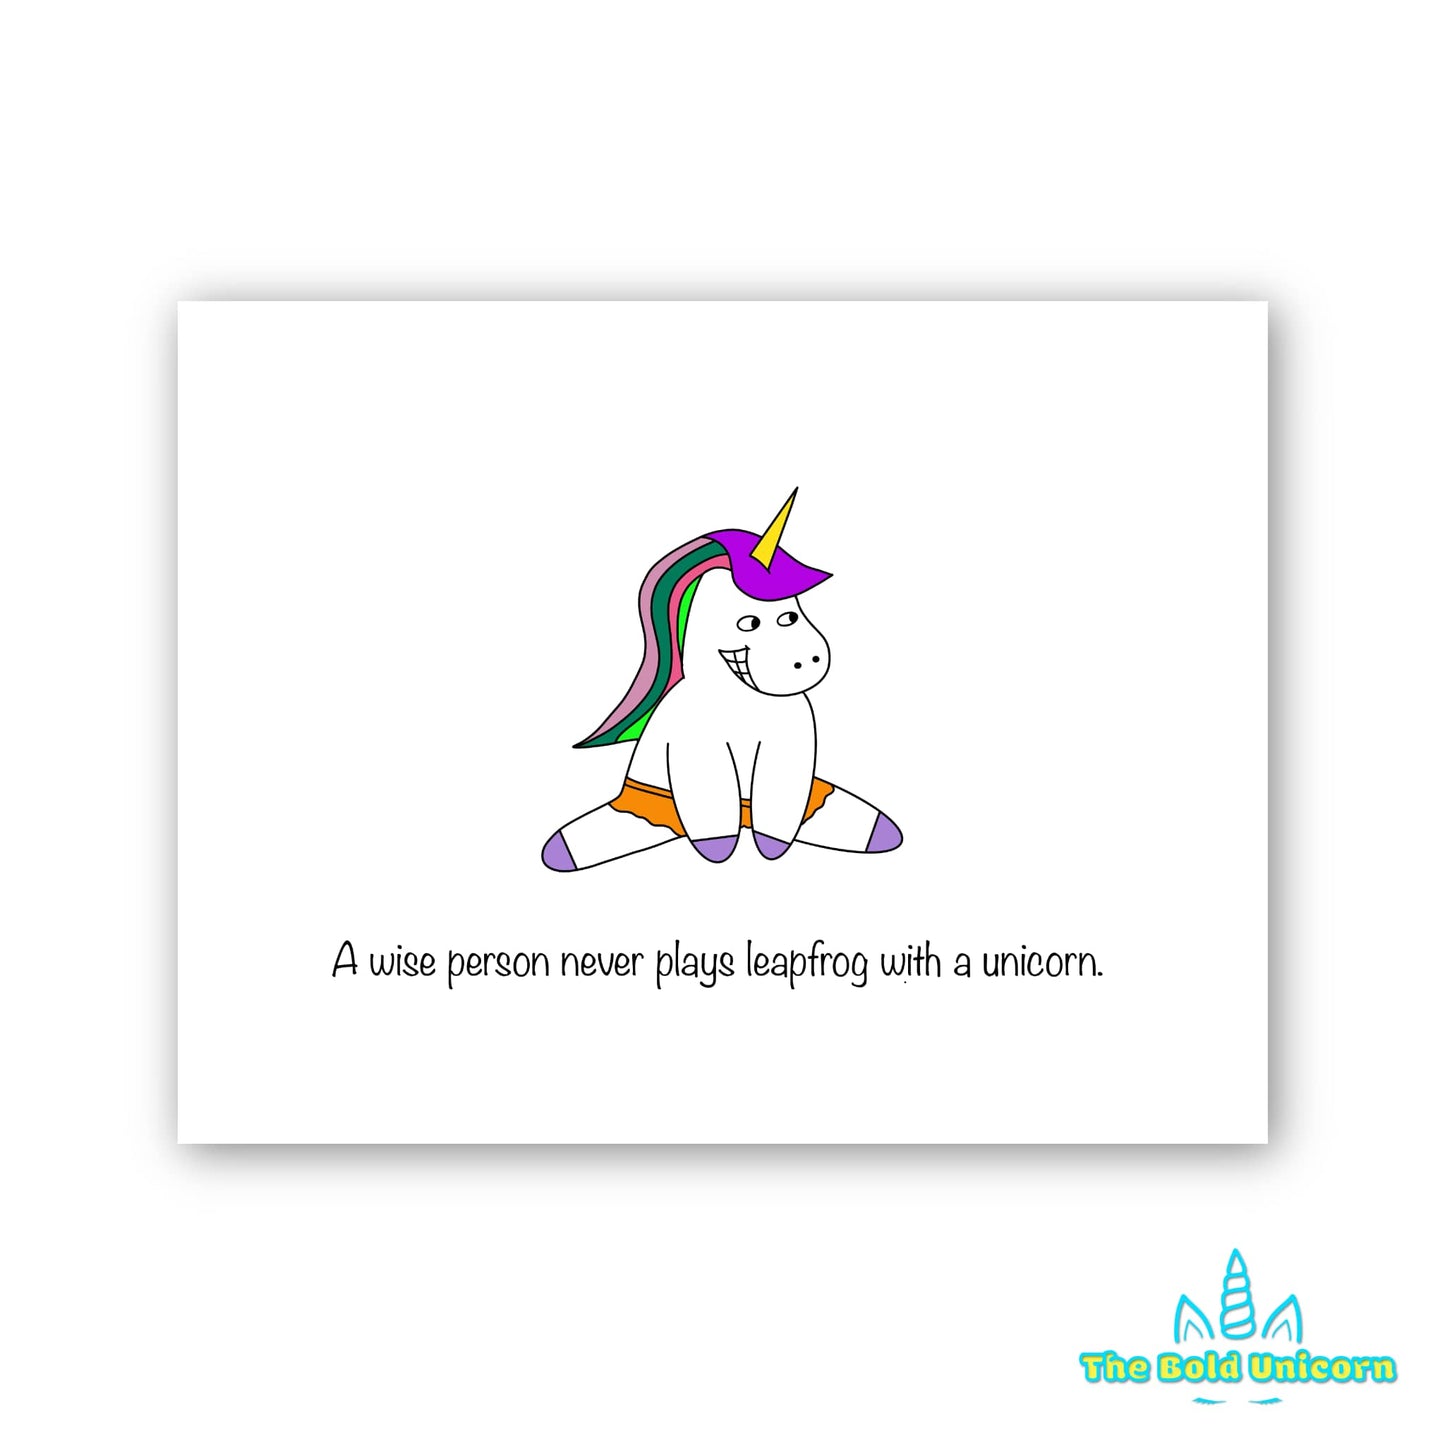 A Wise Person Never Plays Leapfrog With a Unicorn